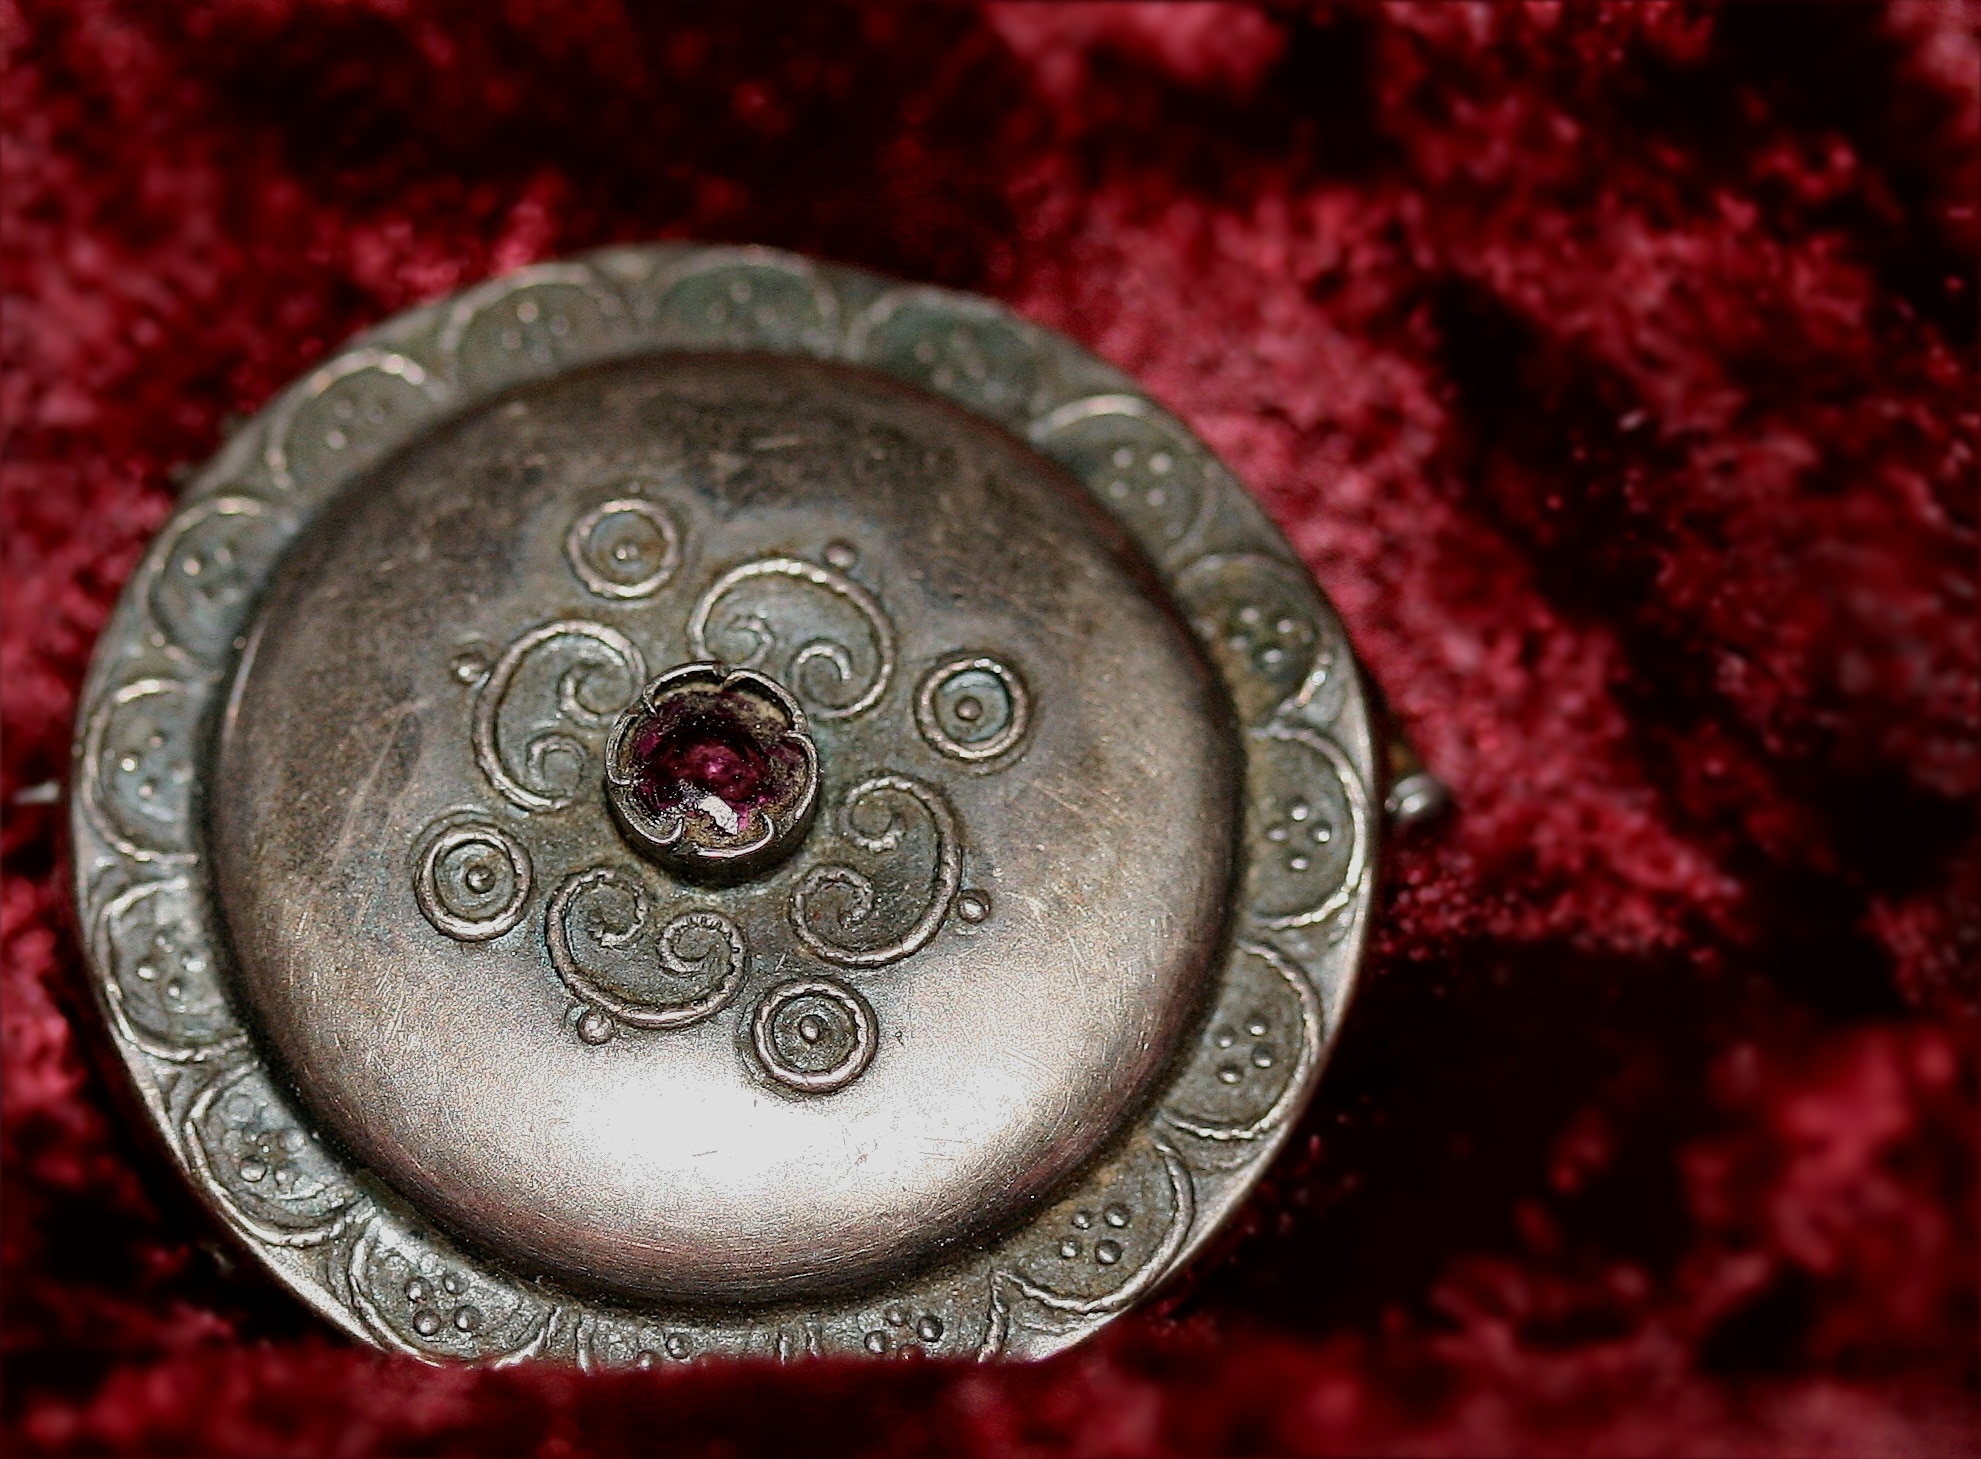 round silver covered container on red fleece textile